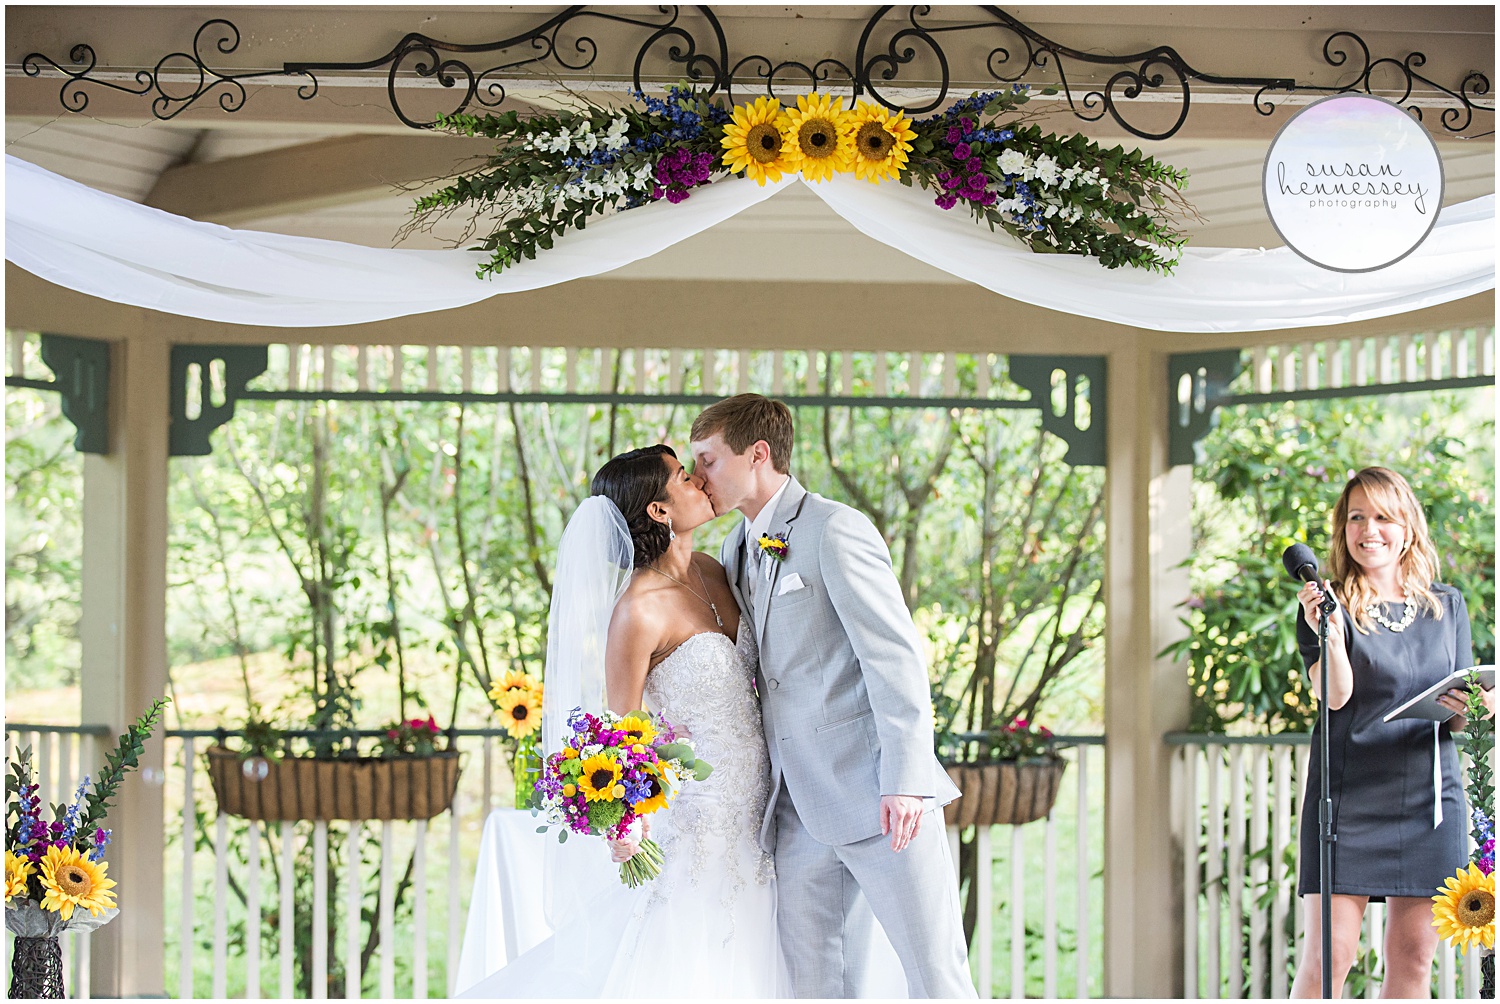 Bride & Groom share first kiss after they say "i do"!